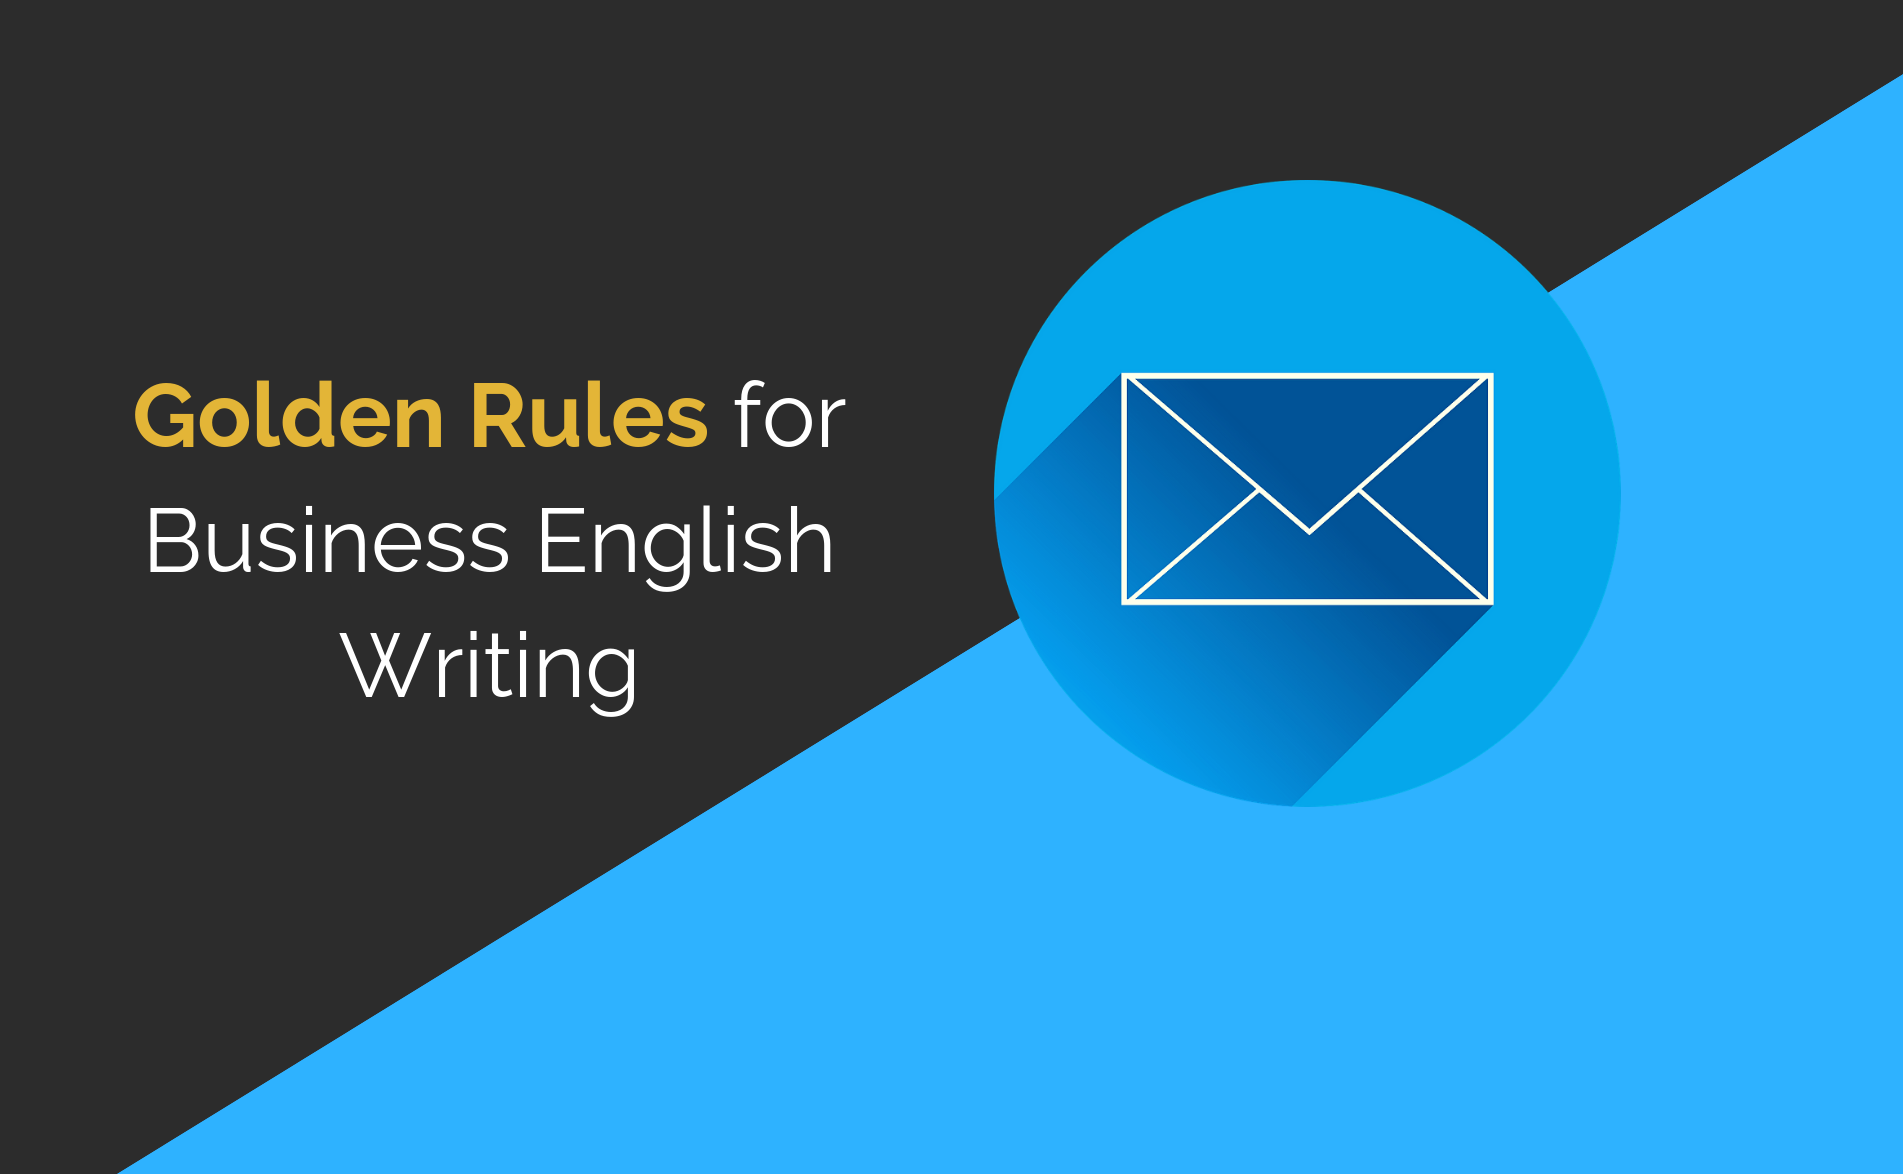 8 Golden Rules for Business English Writing